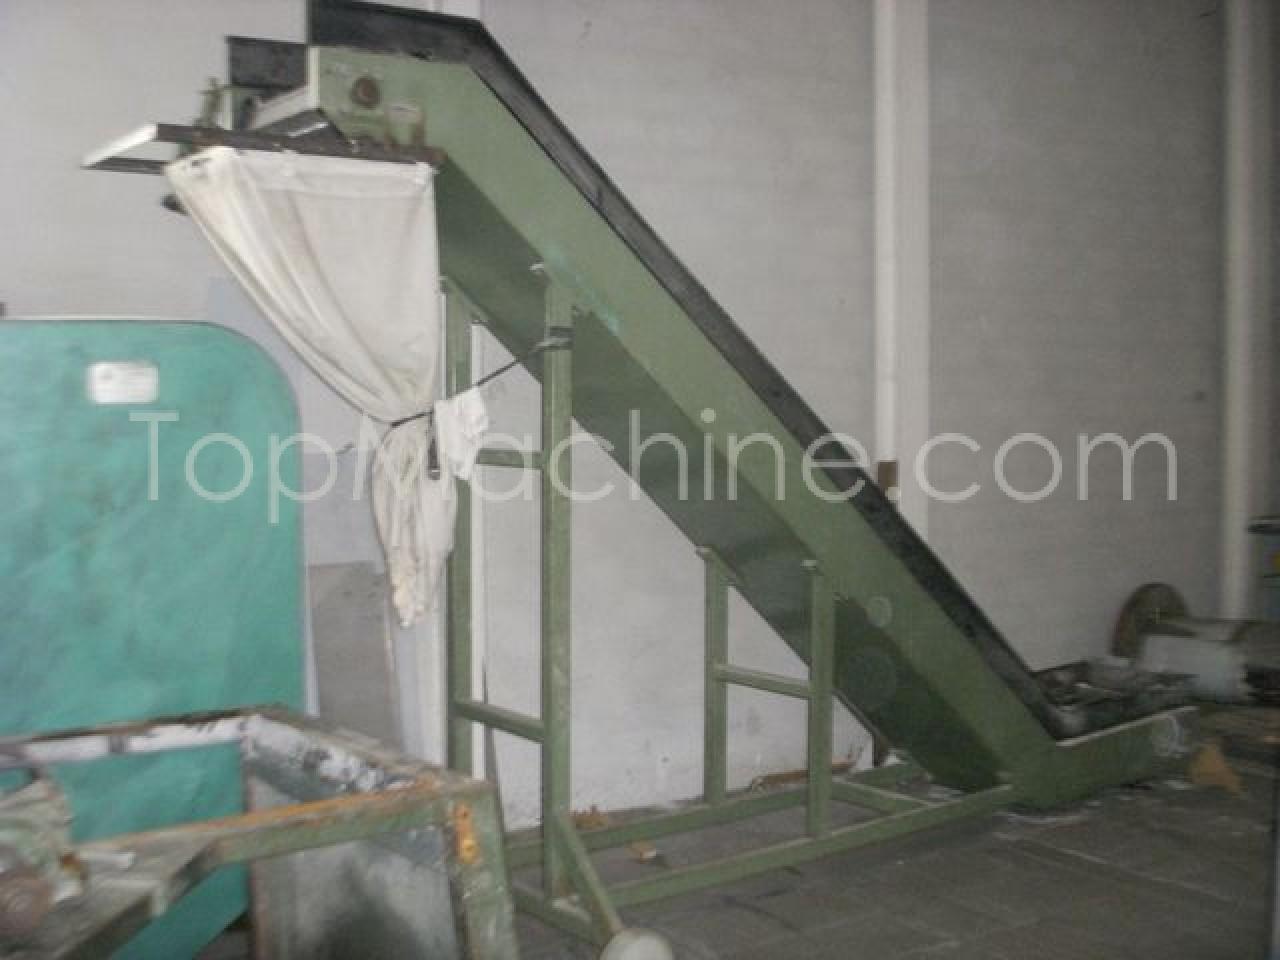 Used Sant Andrea G15/600 Recycling Shredders